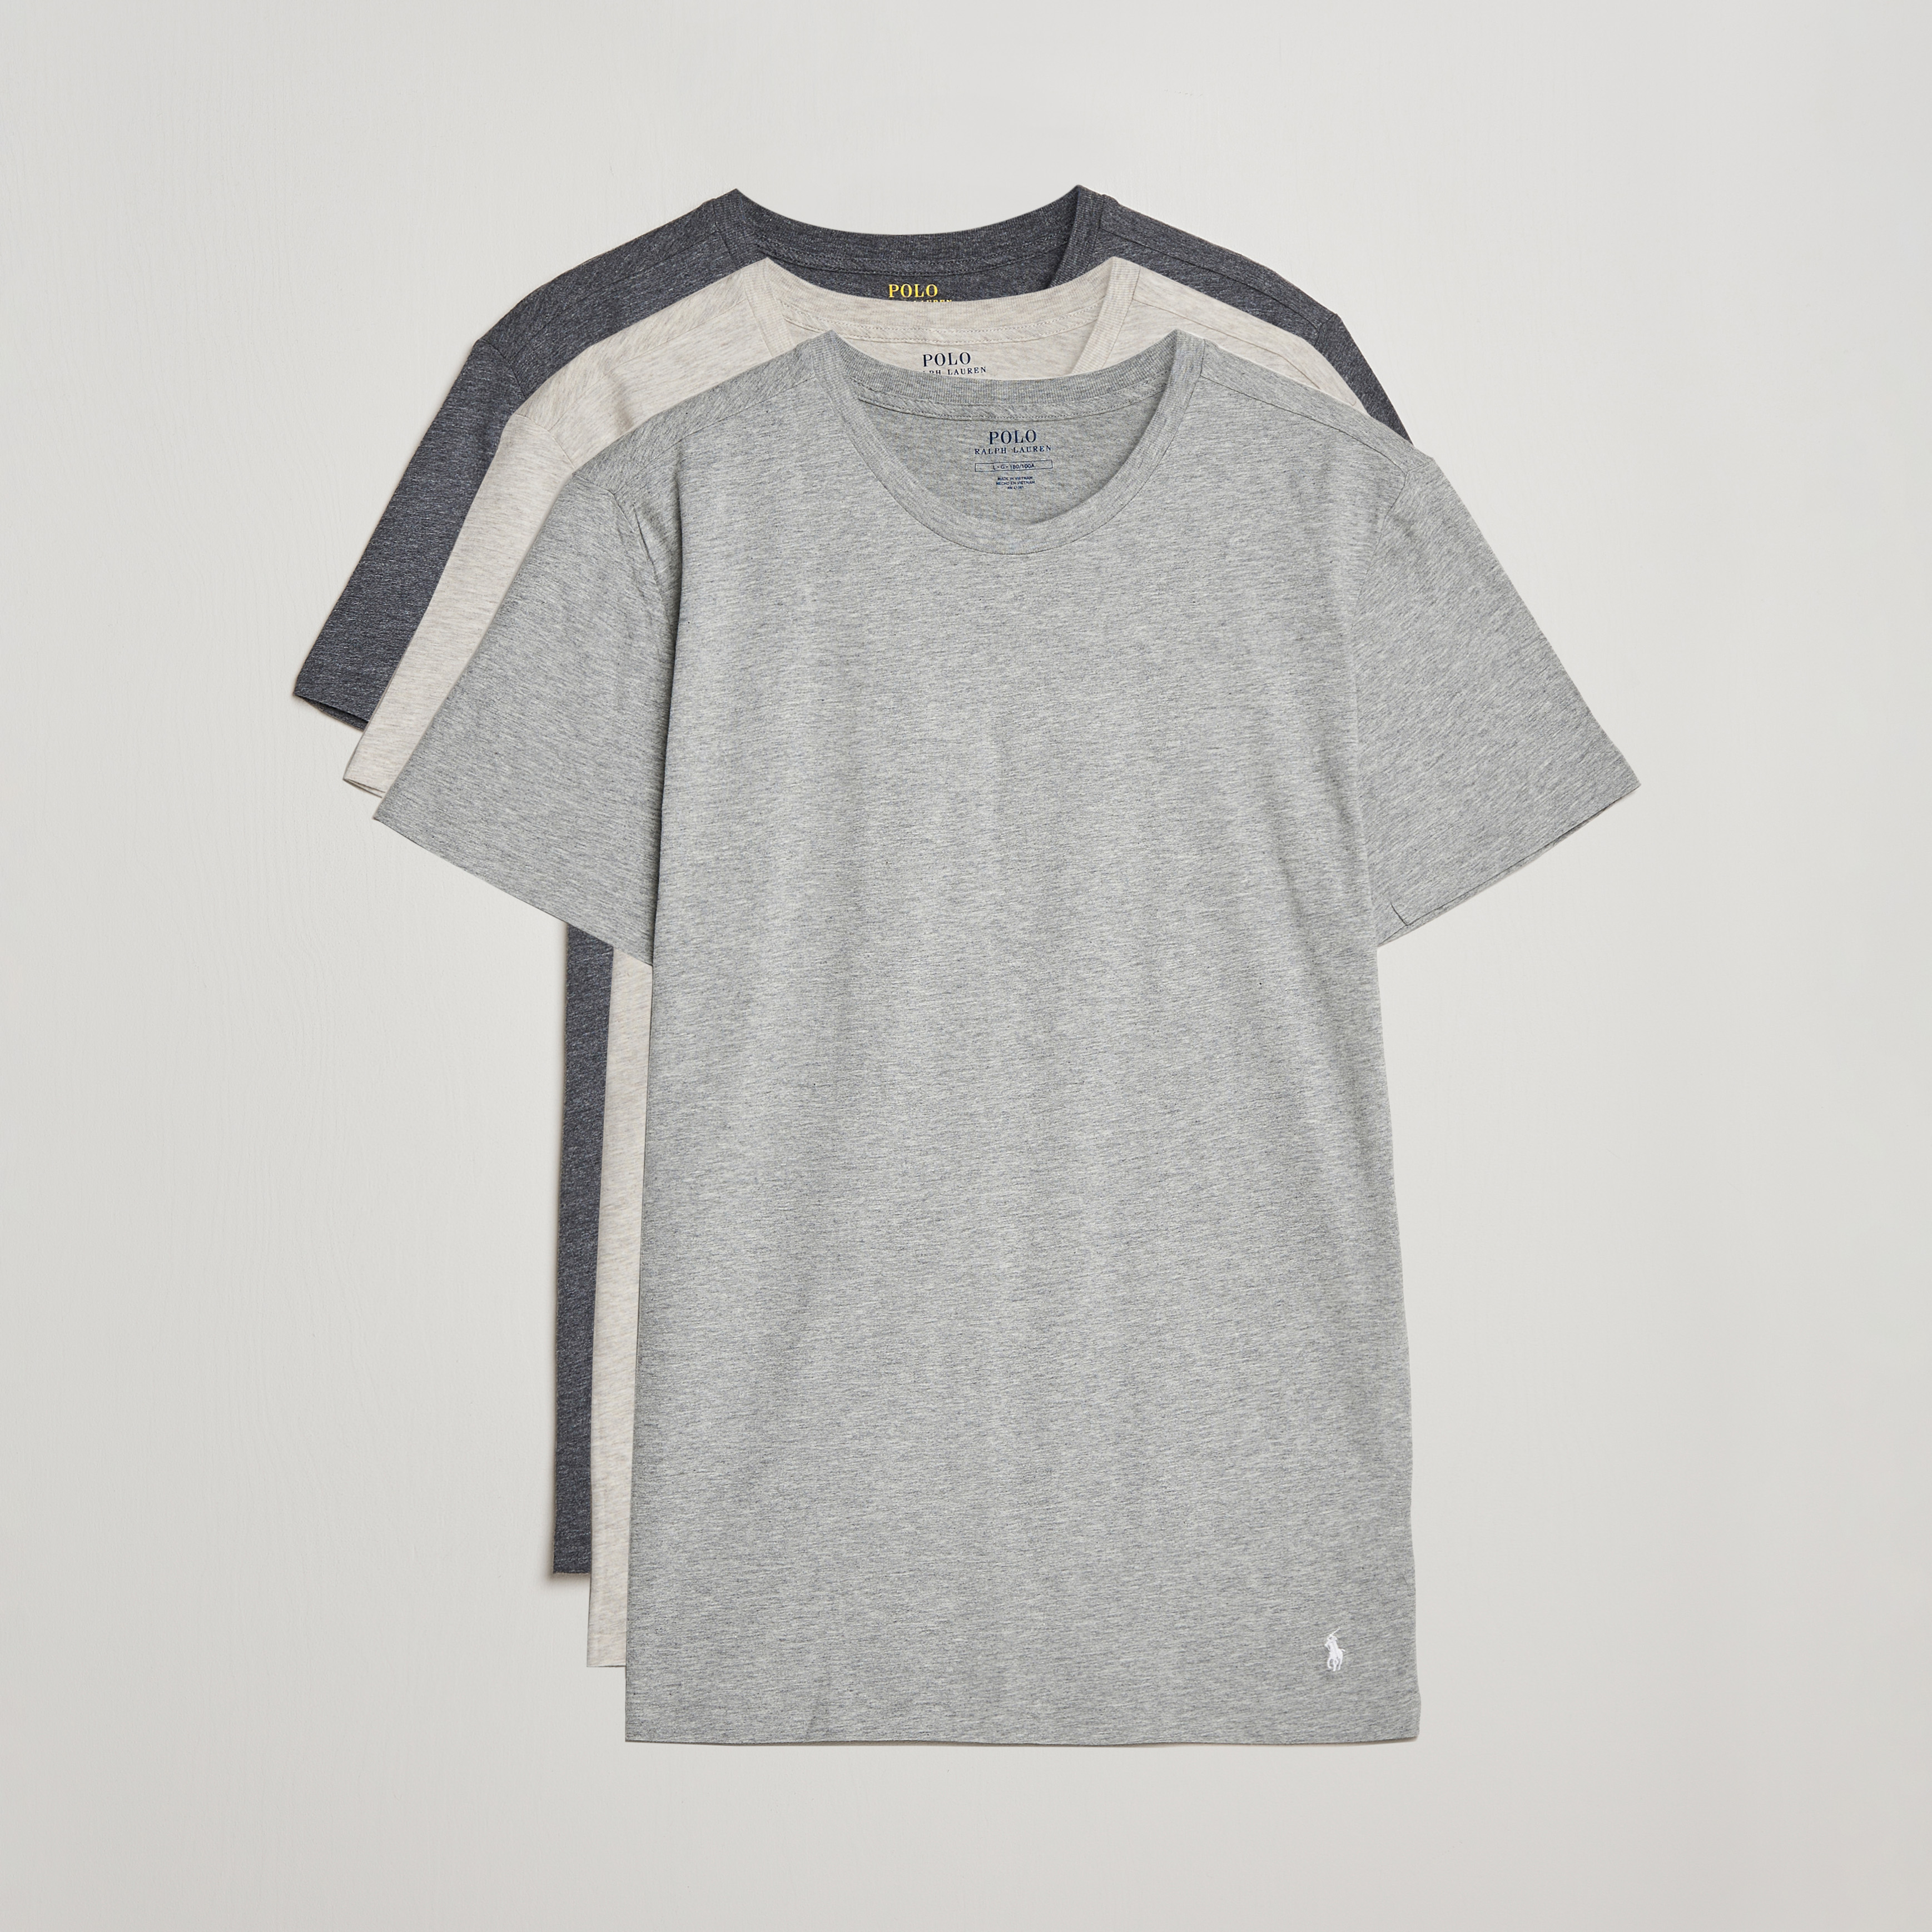 Crew Heather/Grey/Charcoal at CareOfC Ralph Neck 3-Pack Polo T-Shirt Lauren